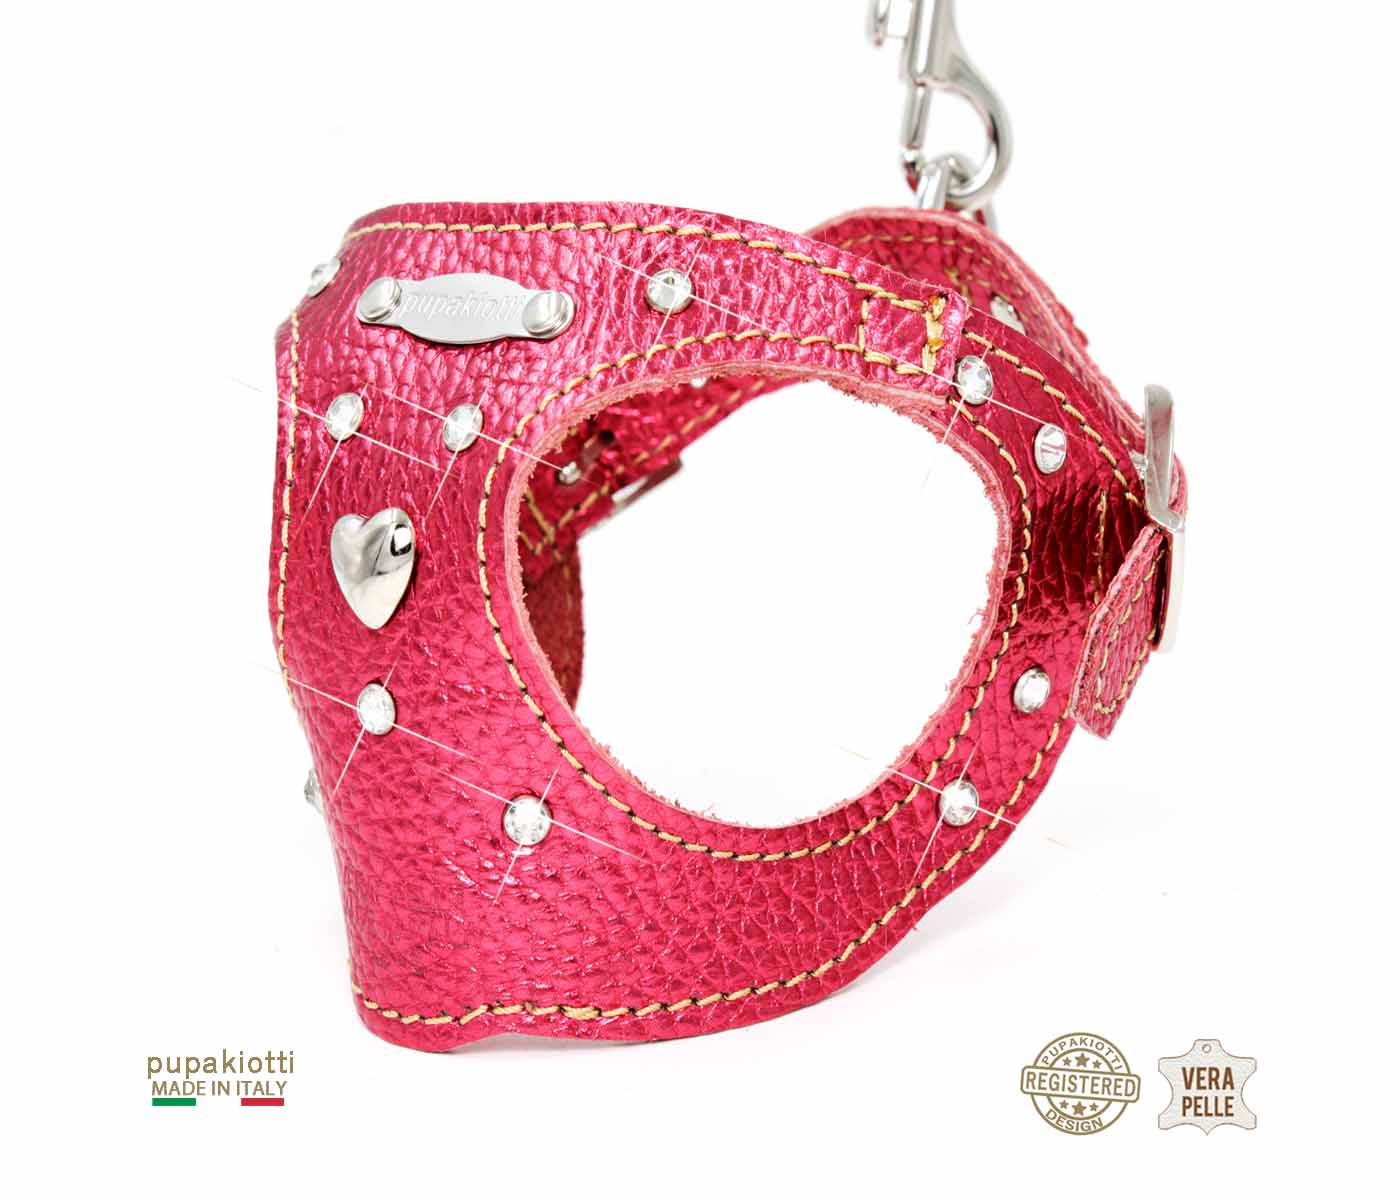 GLAM Swarovski. 3-piece set. Harness and leash with bag holder in leather for dog